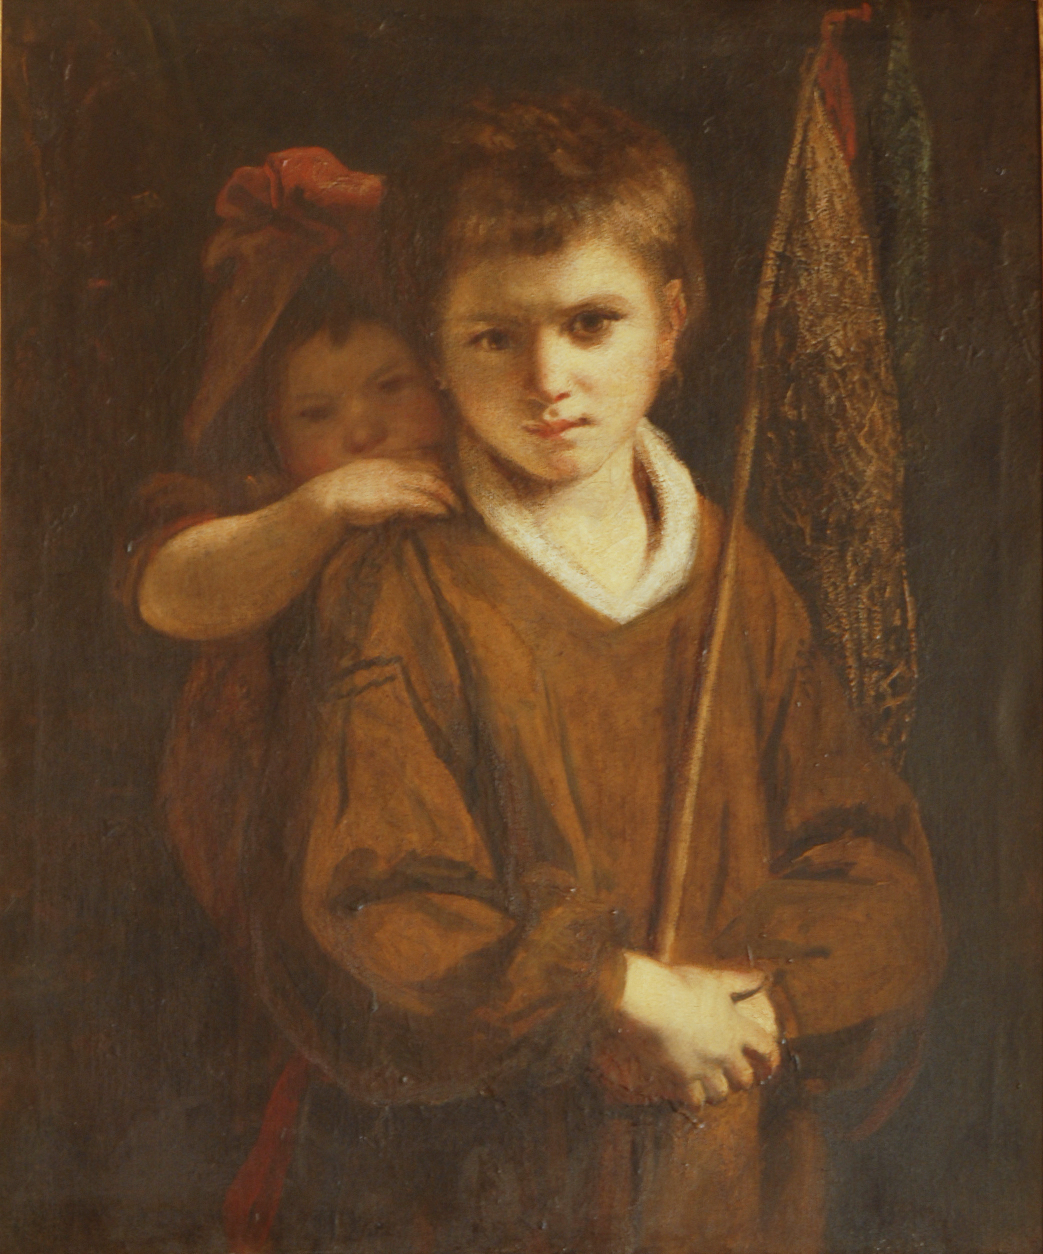 1775, oil on canvas, 76.2 × 63.5 cm. The Faringdon Collection Trust, Buscot Park. Mannings no. 2016. This image represents the exact object shown at the British Institution loan exhibition of 1823 as cat. no. 4, <i>Boy with Cabbage Nets</i>